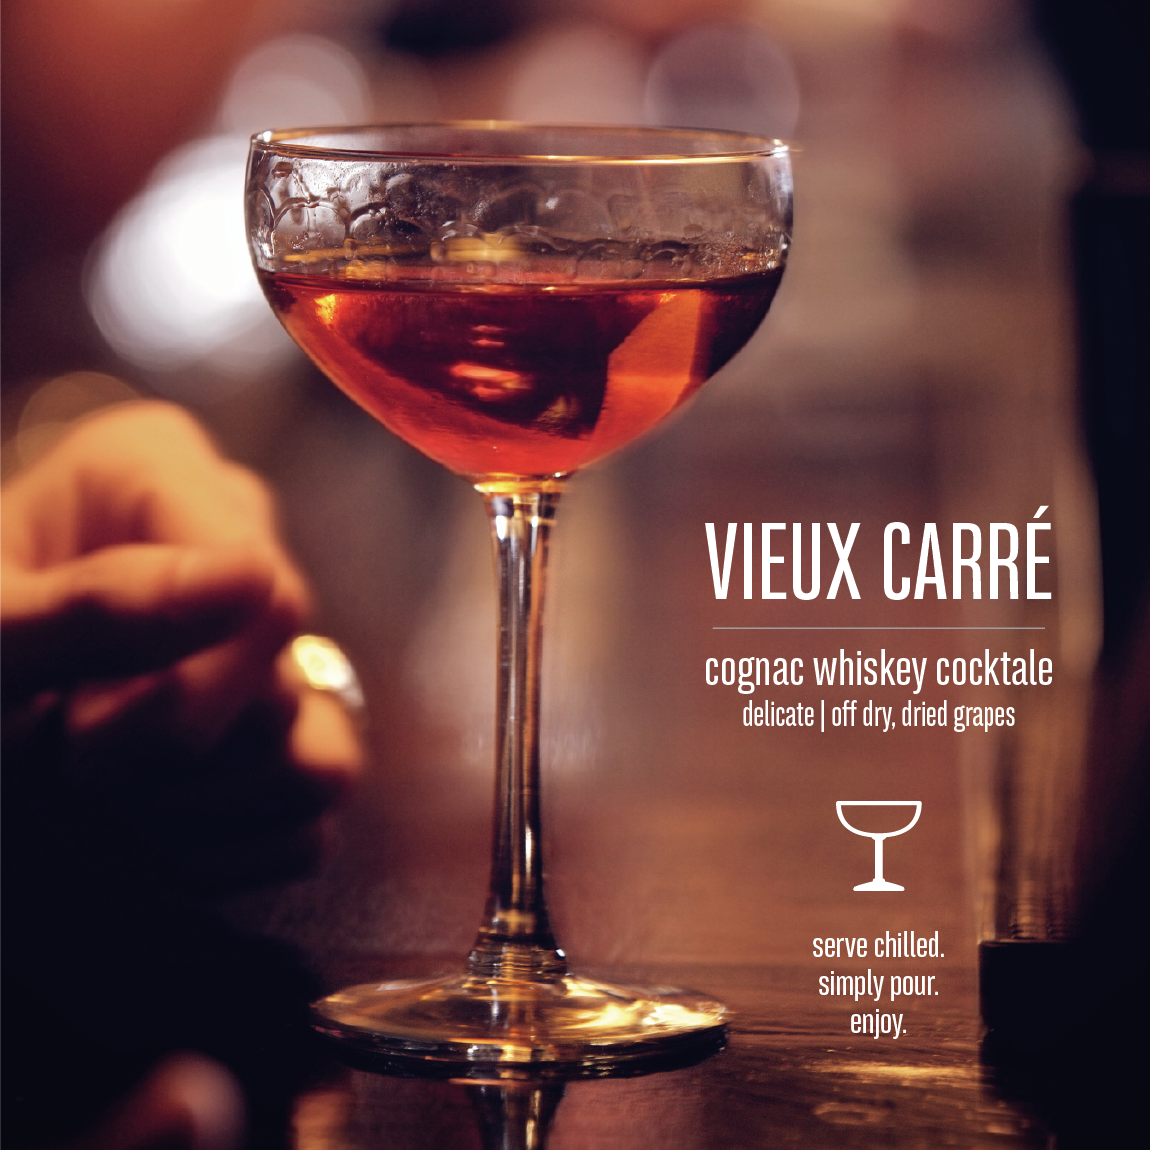 Bottled Cocktail luxury vieux carre whiskey Whisky Cognac Vermouth recipe